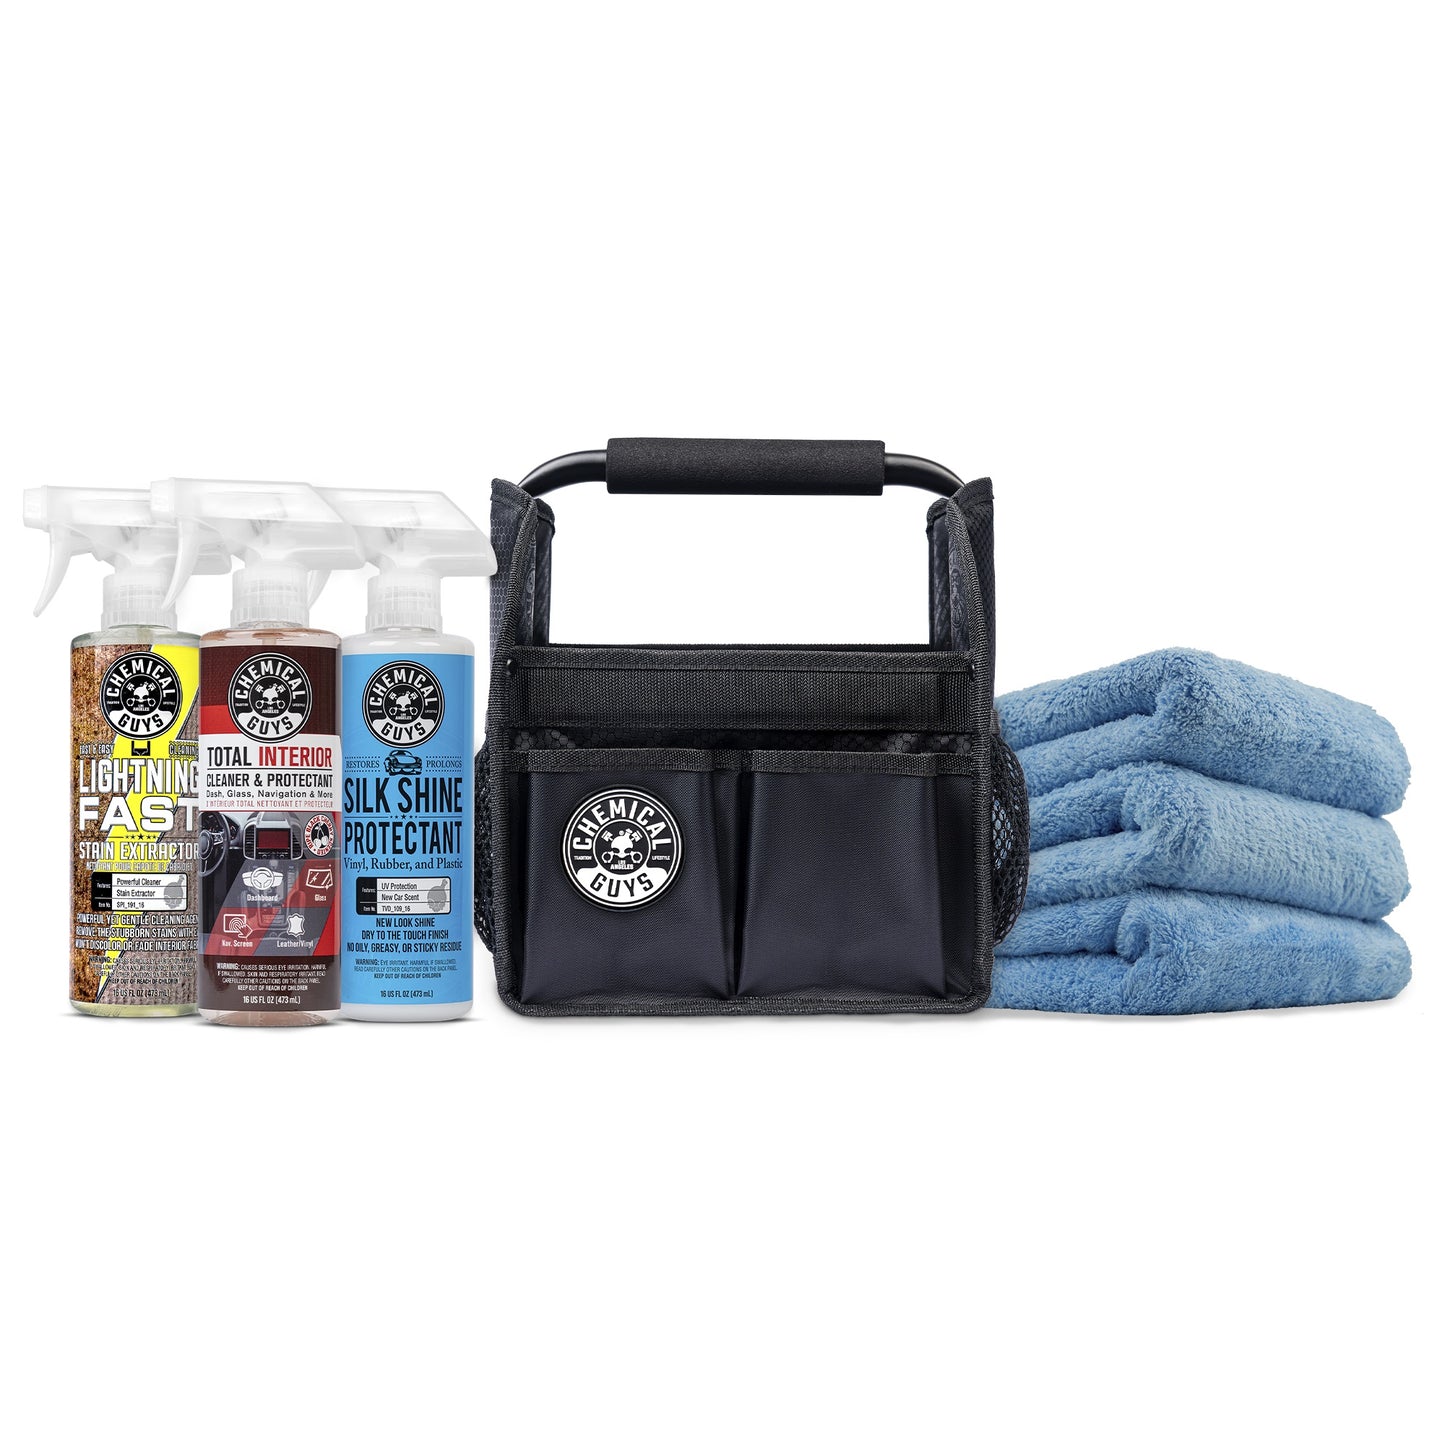 Speed Load Interior Clean & Protect Kit